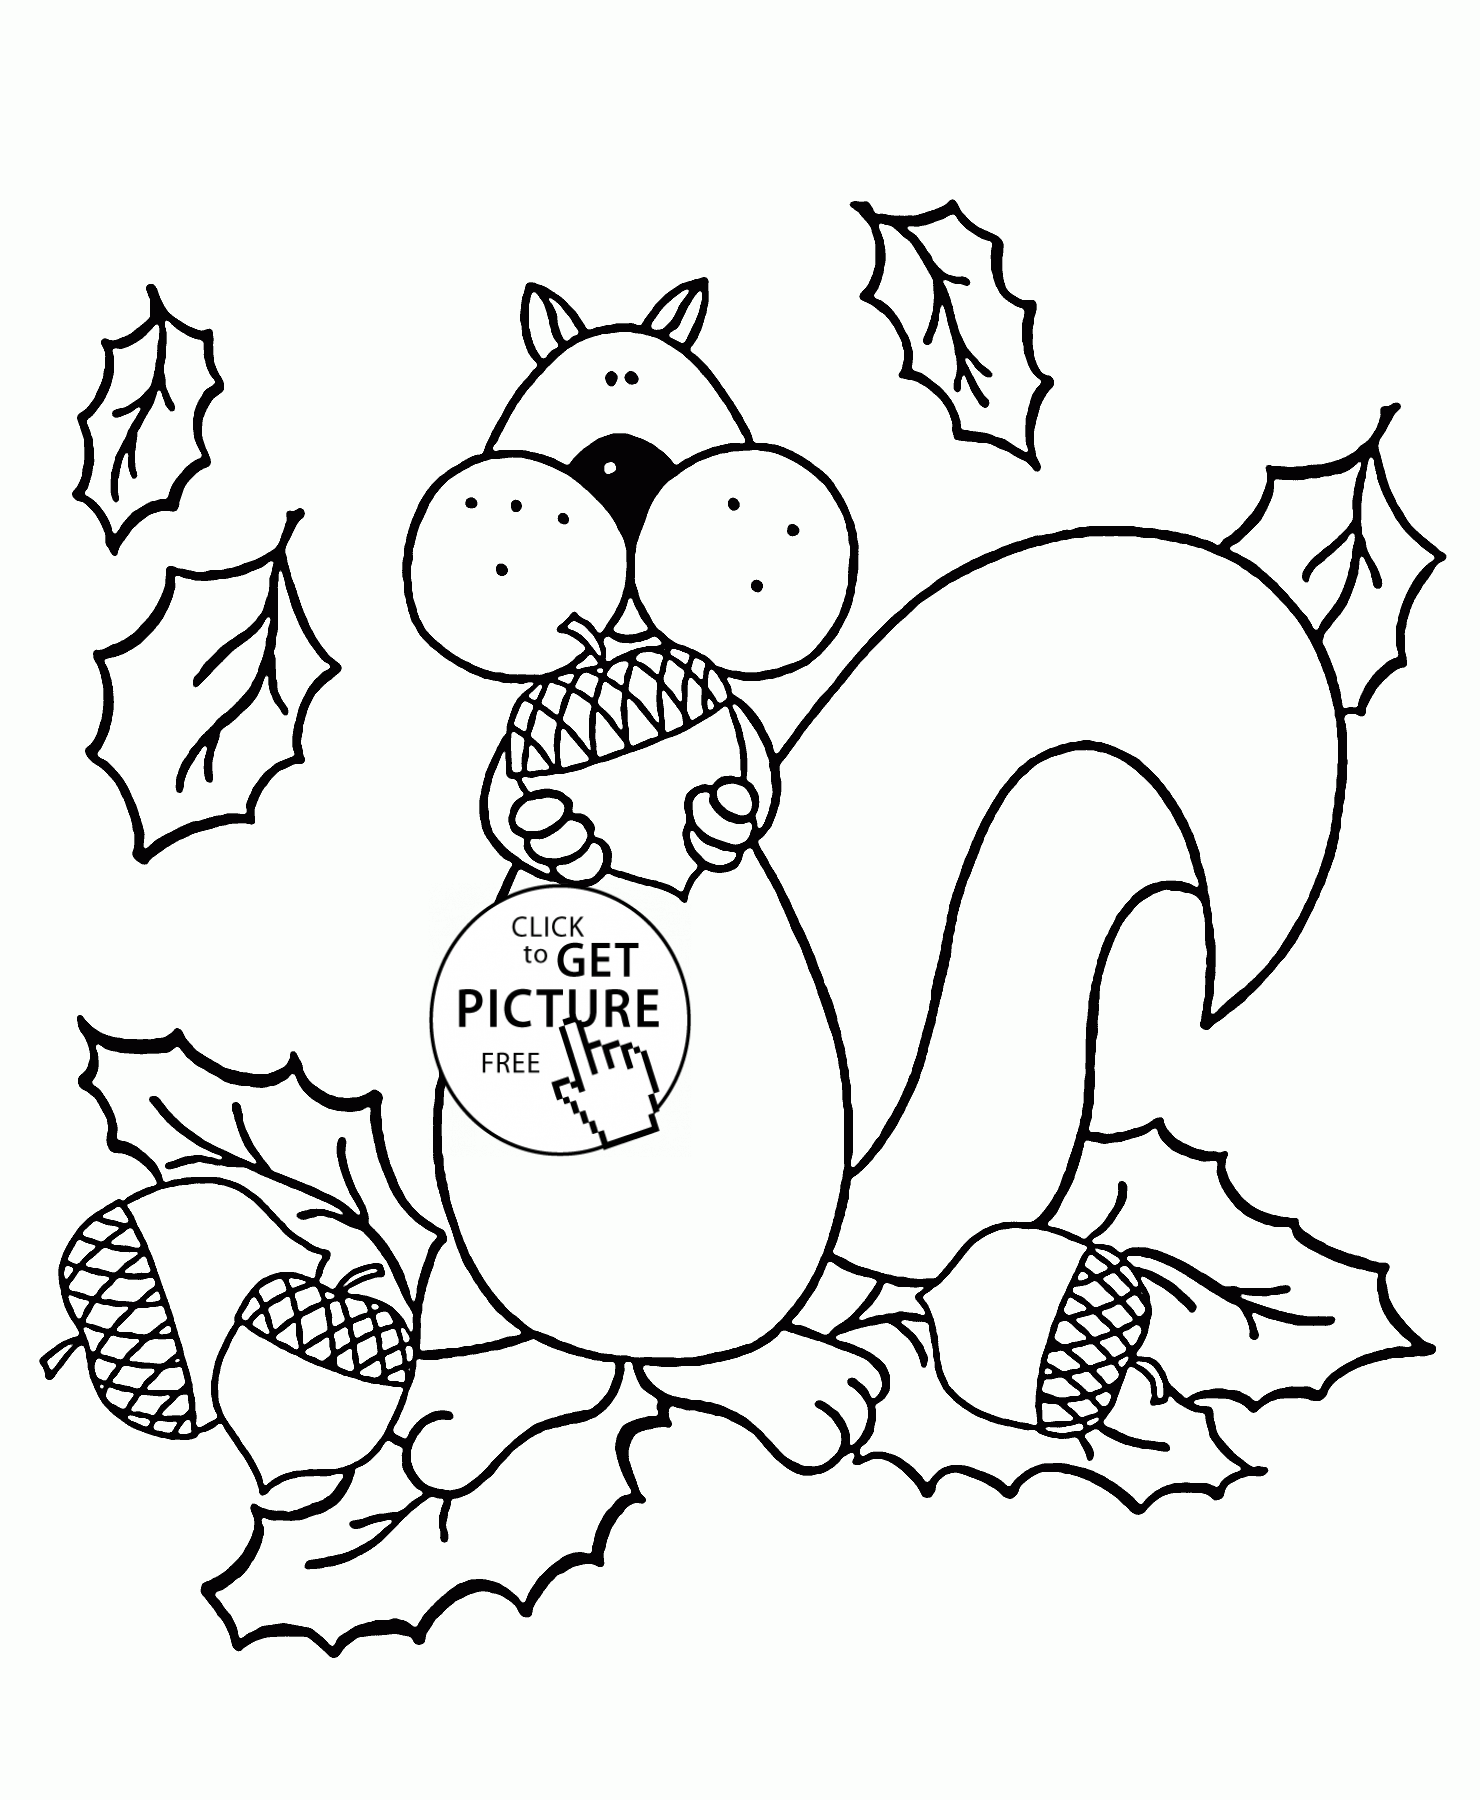 Squirrel and autumn coloring pages for kids fall seasons printables free